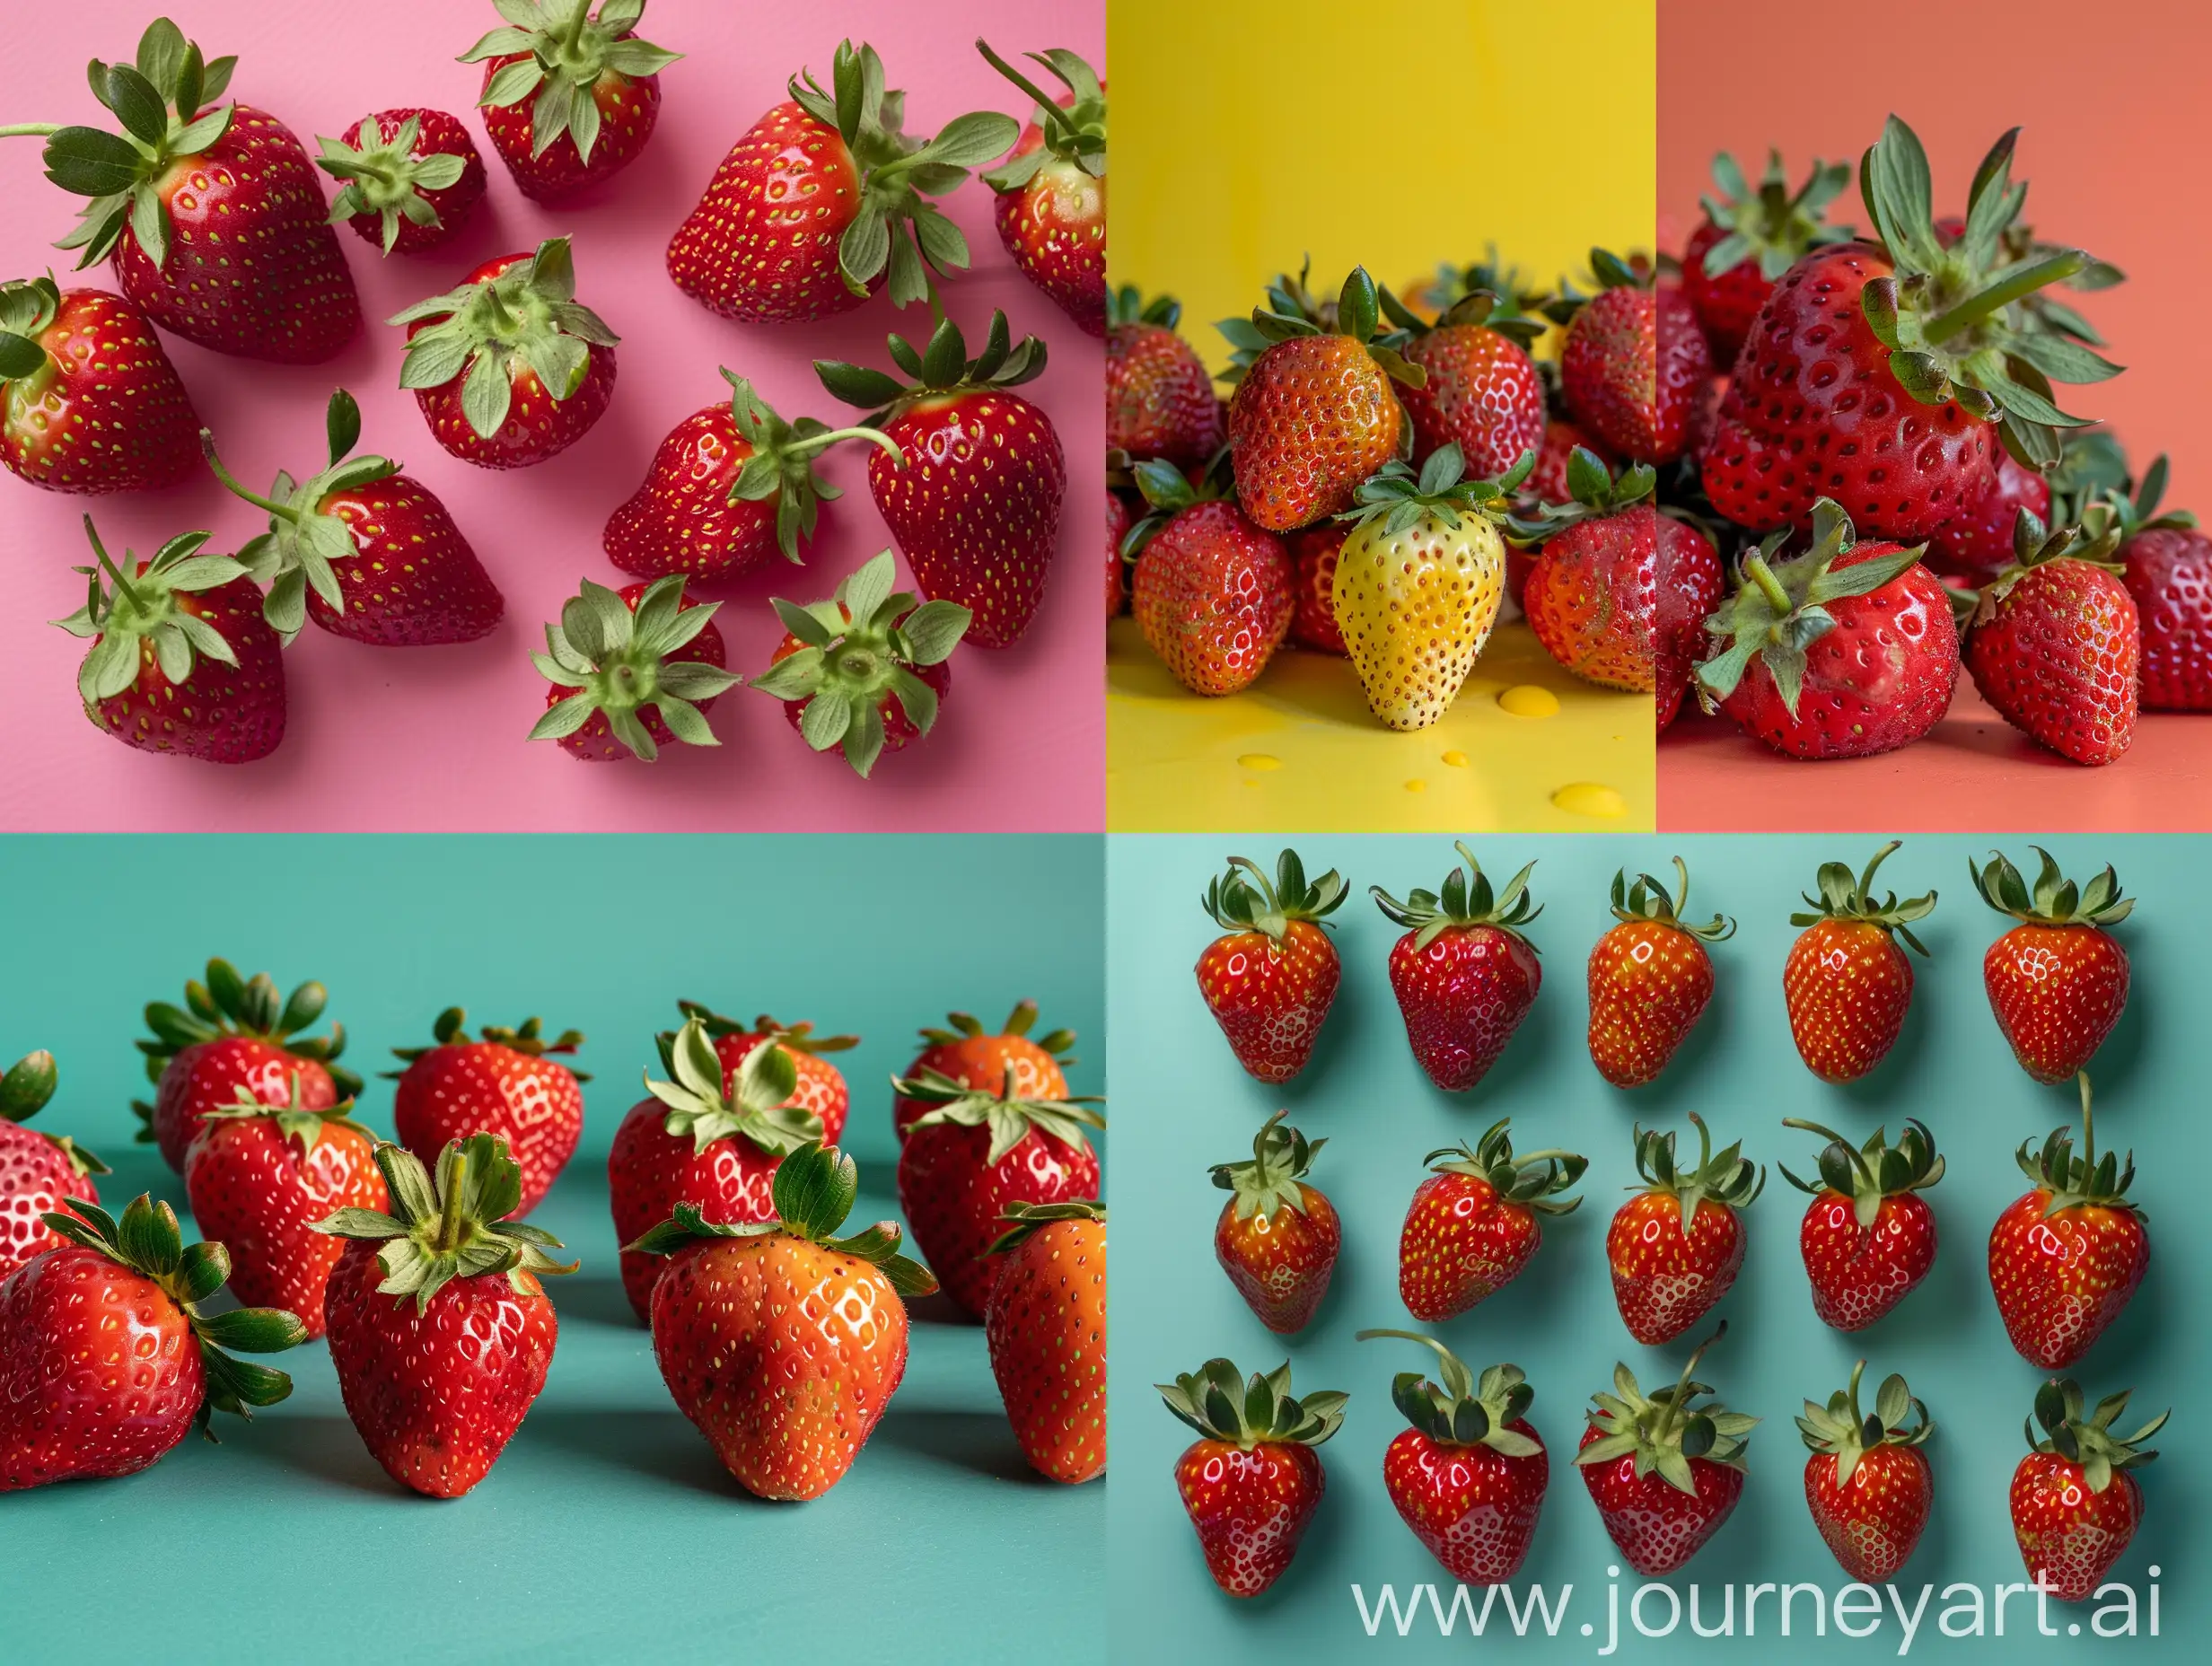 Vibrant-Strawberry-Studio-Photography-Colorful-Fruit-Composition